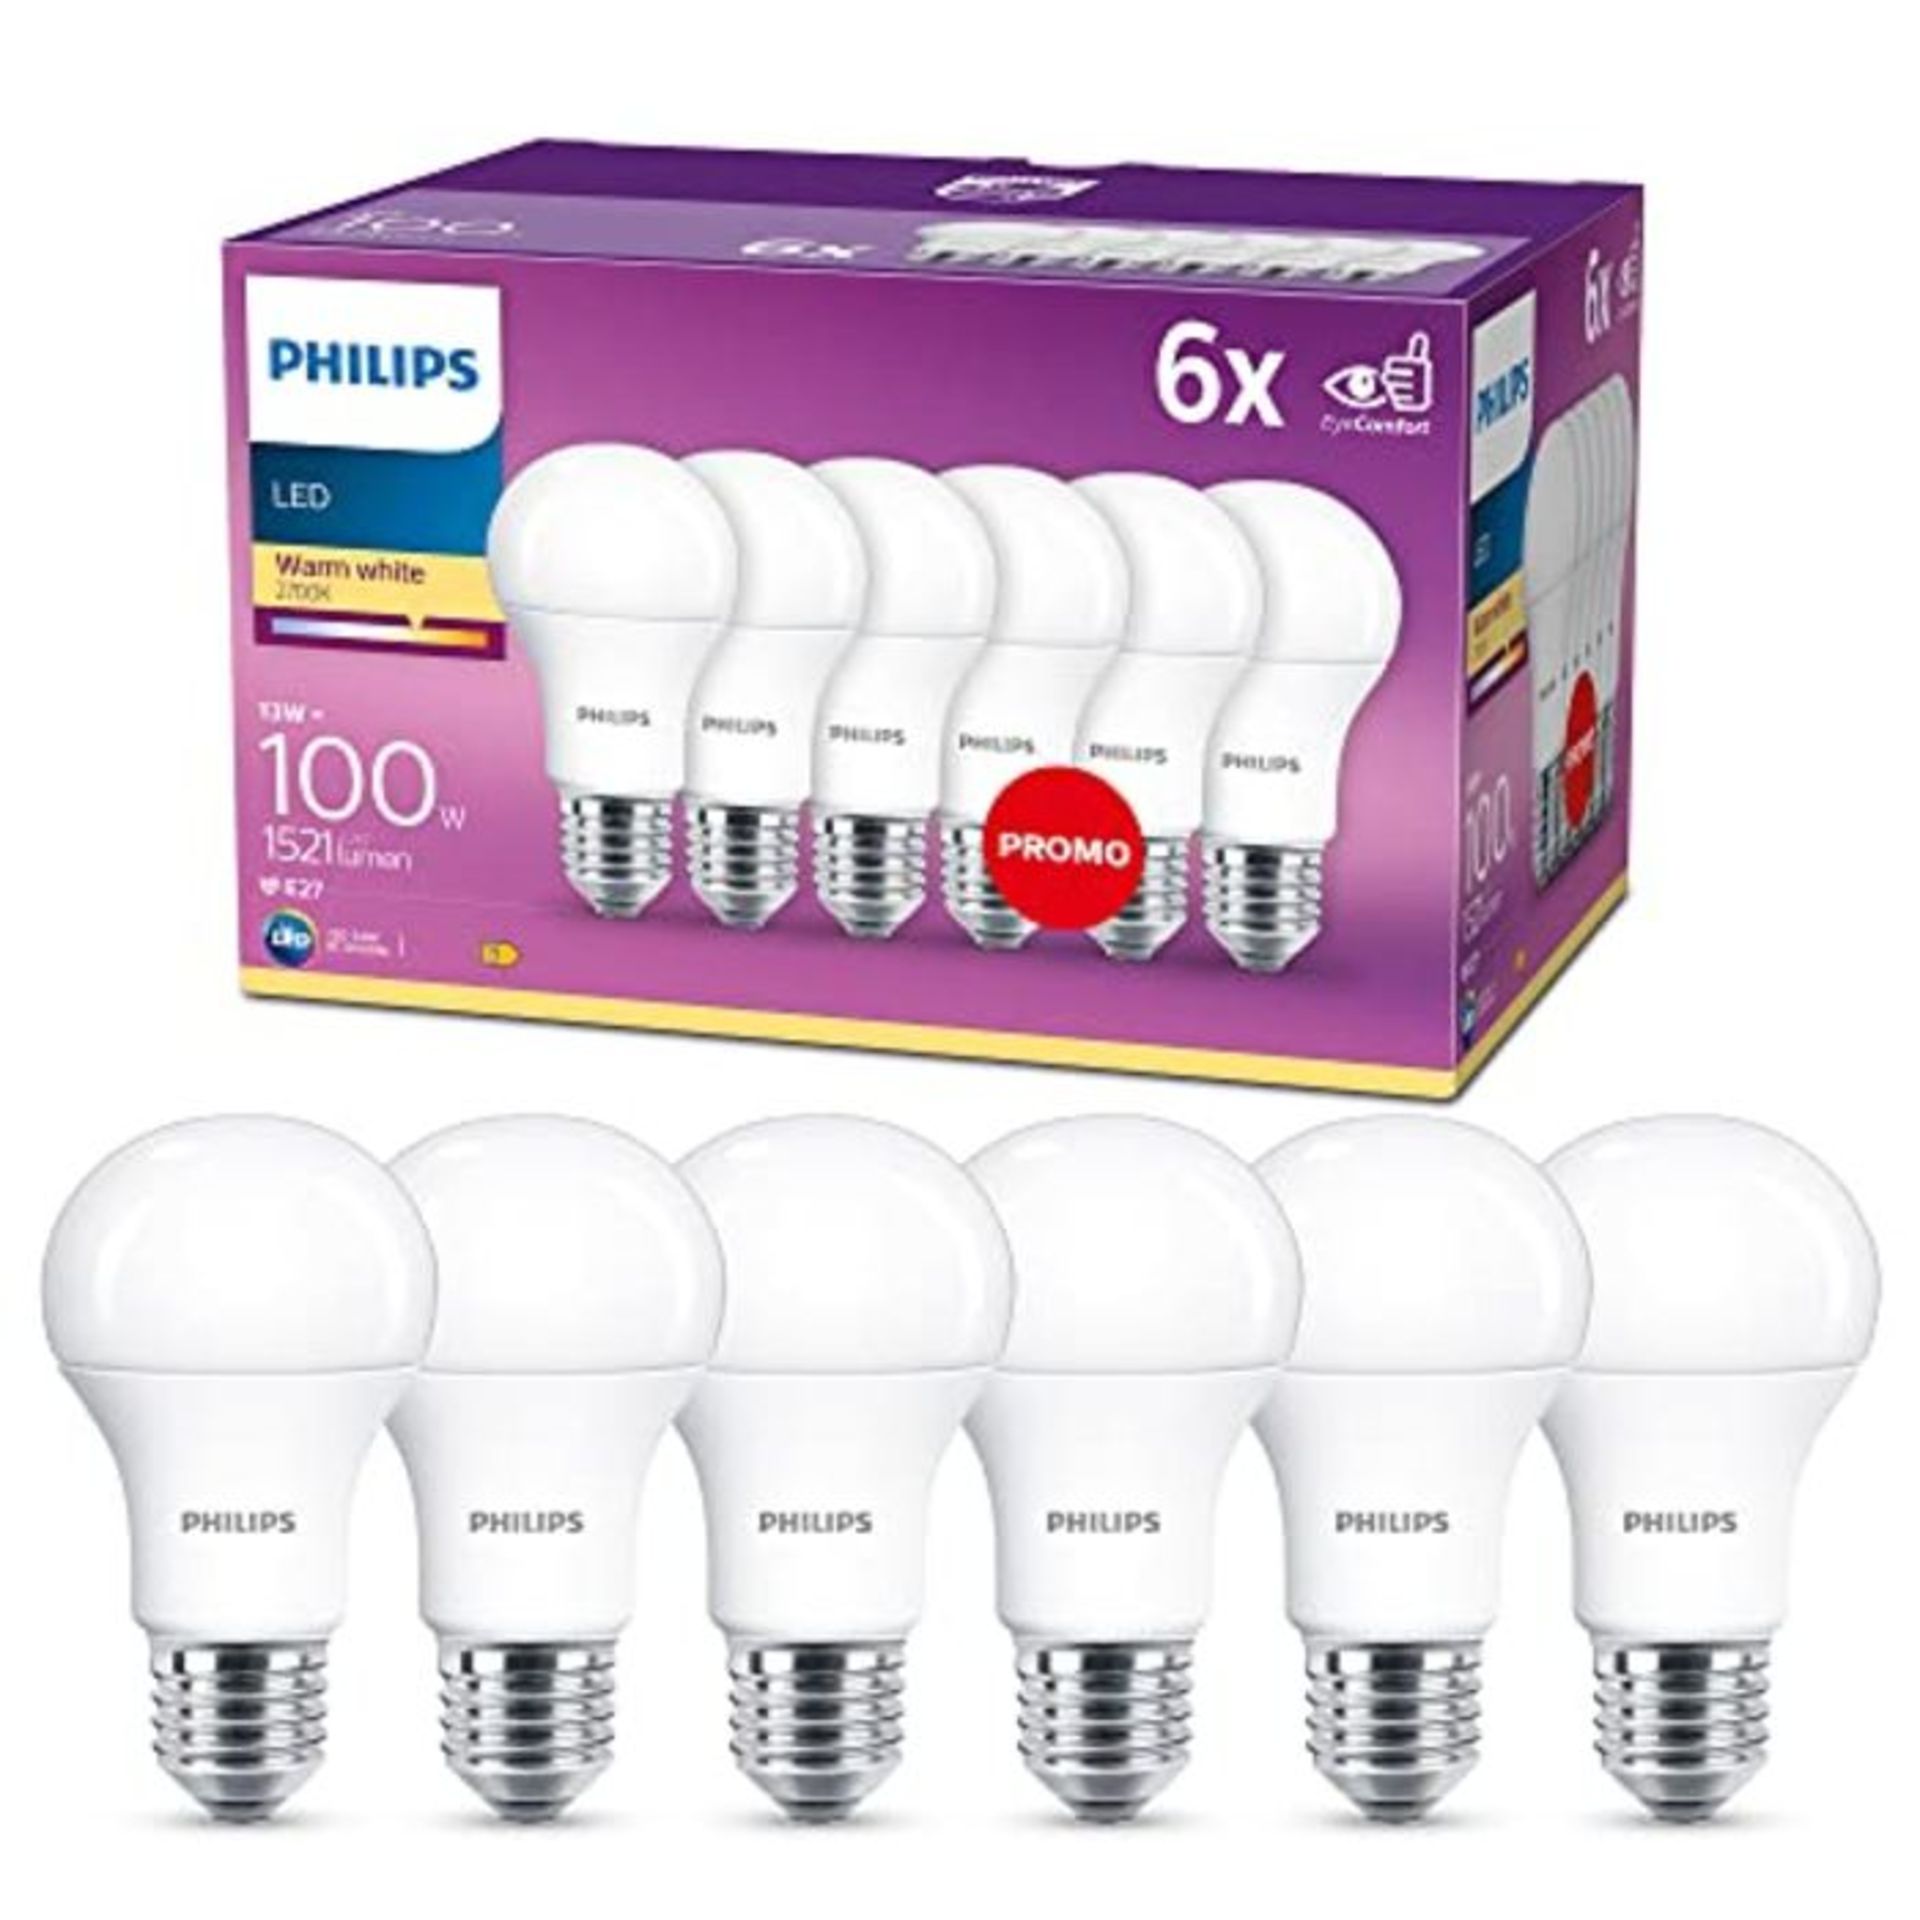 Philips LED A60 6 Pack Frosted Light Bulbs [E27 Edison Screw] 13W - 100 W Equivalent,